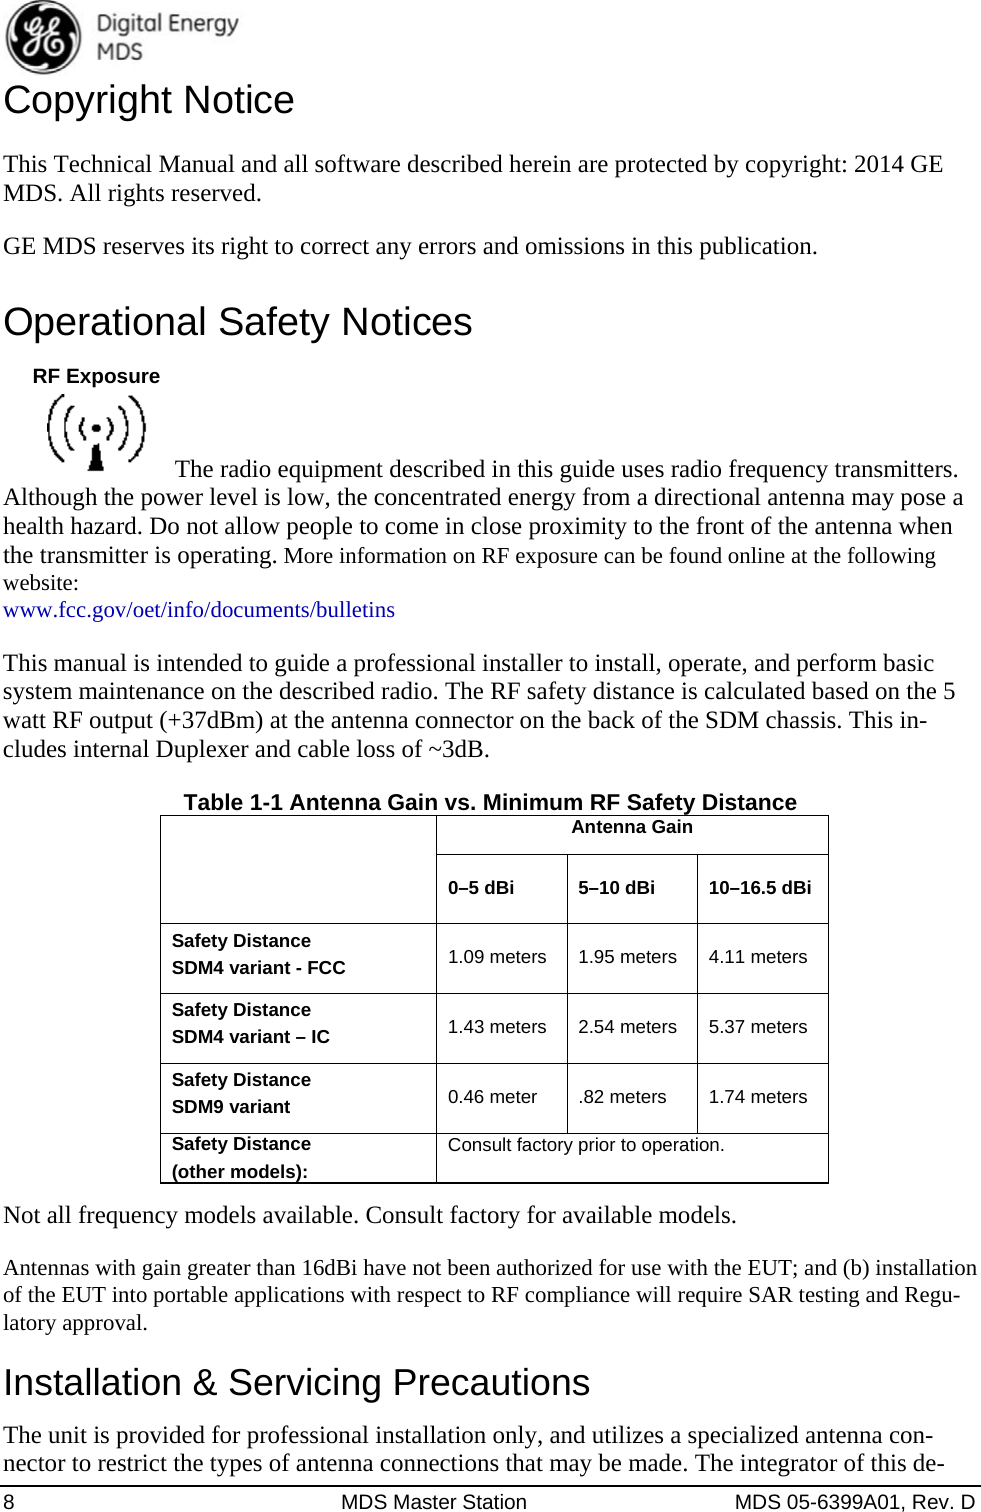  8  MDS Master Station  MDS 05-6399A01, Rev. D Copyright Notice This Technical Manual and all software described herein are protected by copyright: 2014 GE MDS. All rights reserved. GE MDS reserves its right to correct any errors and omissions in this publication. Operational Safety Notices   The radio equipment described in this guide uses radio frequency transmitters. Although the power level is low, the concentrated energy from a directional antenna may pose a health hazard. Do not allow people to come in close proximity to the front of the antenna when the transmitter is operating. More information on RF exposure can be found online at the following website: www.fcc.gov/oet/info/documents/bulletins This manual is intended to guide a professional installer to install, operate, and perform basic system maintenance on the described radio. The RF safety distance is calculated based on the 5 watt RF output (+37dBm) at the antenna connector on the back of the SDM chassis. This in-cludes internal Duplexer and cable loss of ~3dB. Table 1-1 Antenna Gain vs. Minimum RF Safety Distance  Antenna Gain0–5 dBi 5–10 dBi 10–16.5 dBi Safety Distance   SDM4 variant - FCC 1.09 meters 1.95 meters 4.11 meters Safety Distance SDM4 variant – IC  1.43 meters  2.54 meters  5.37 meters Safety Distance   SDM9 variant 0.46 meter .82 meters 1.74 meters Safety Distance (other models): Consult factory prior to operation. Not all frequency models available. Consult factory for available models. Antennas with gain greater than 16dBi have not been authorized for use with the EUT; and (b) installation of the EUT into portable applications with respect to RF compliance will require SAR testing and Regu-latory approval. Installation &amp; Servicing Precautions The unit is provided for professional installation only, and utilizes a specialized antenna con-nector to restrict the types of antenna connections that may be made. The integrator of this de-RF Exposure